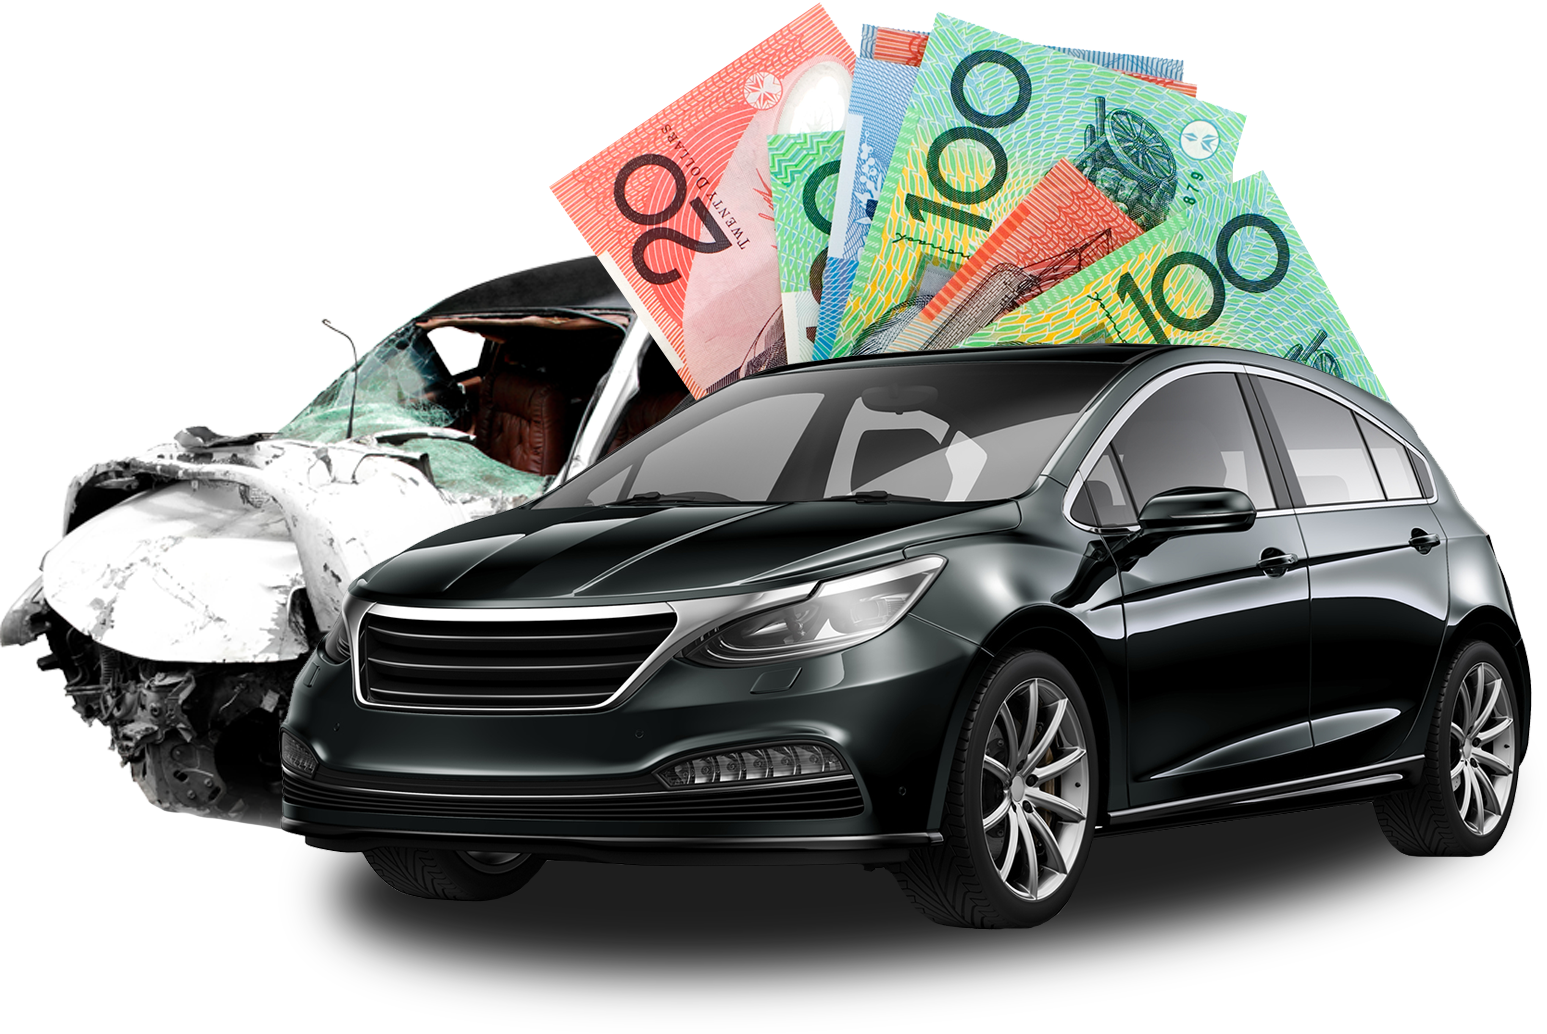 cash for scrap metal pick up services in adelaide